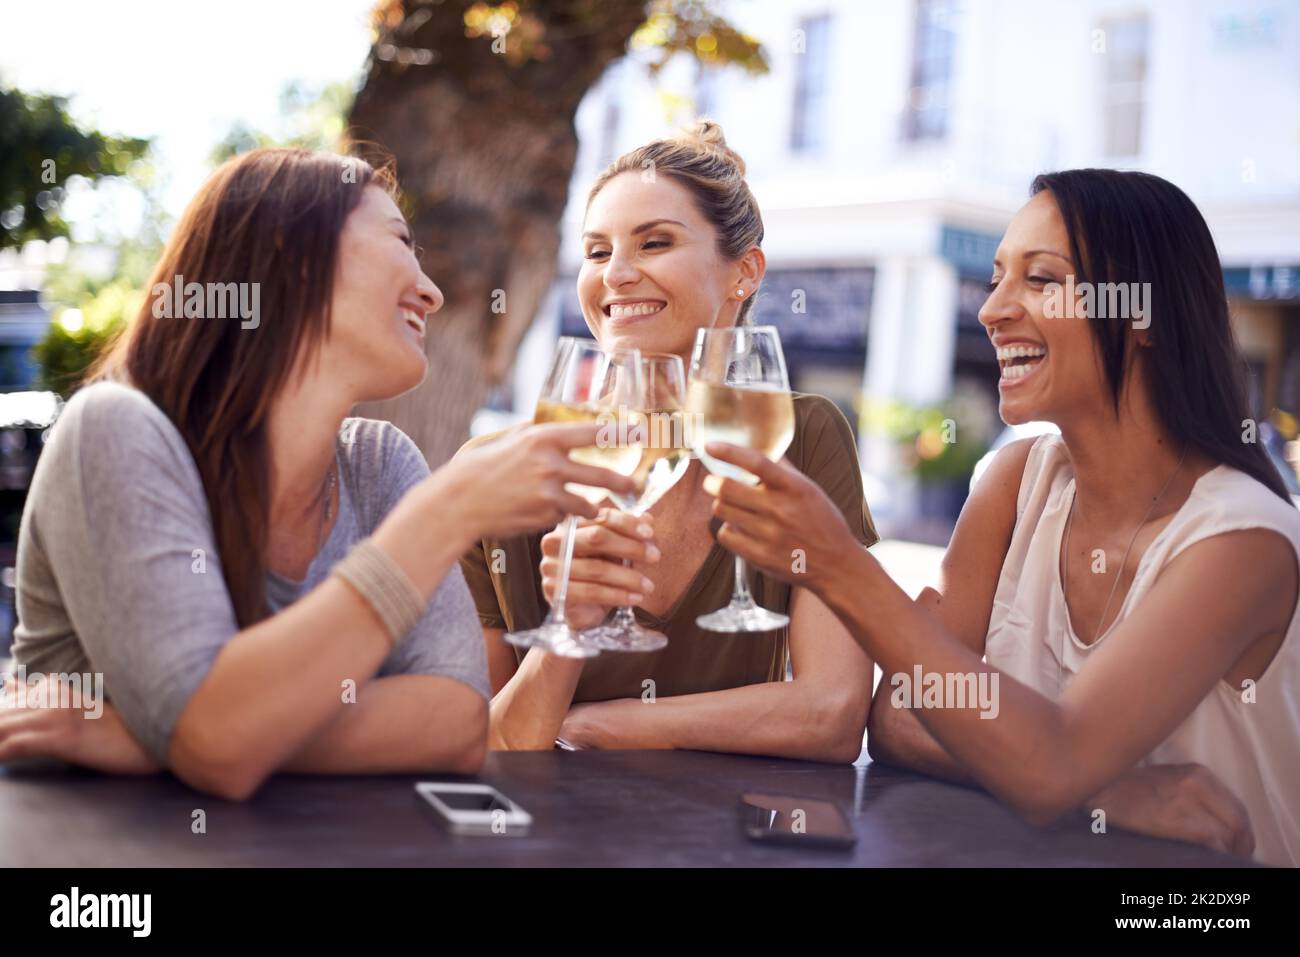 Keep your friends close. Shot of a happy group of friends having a drink together. Stock Photo